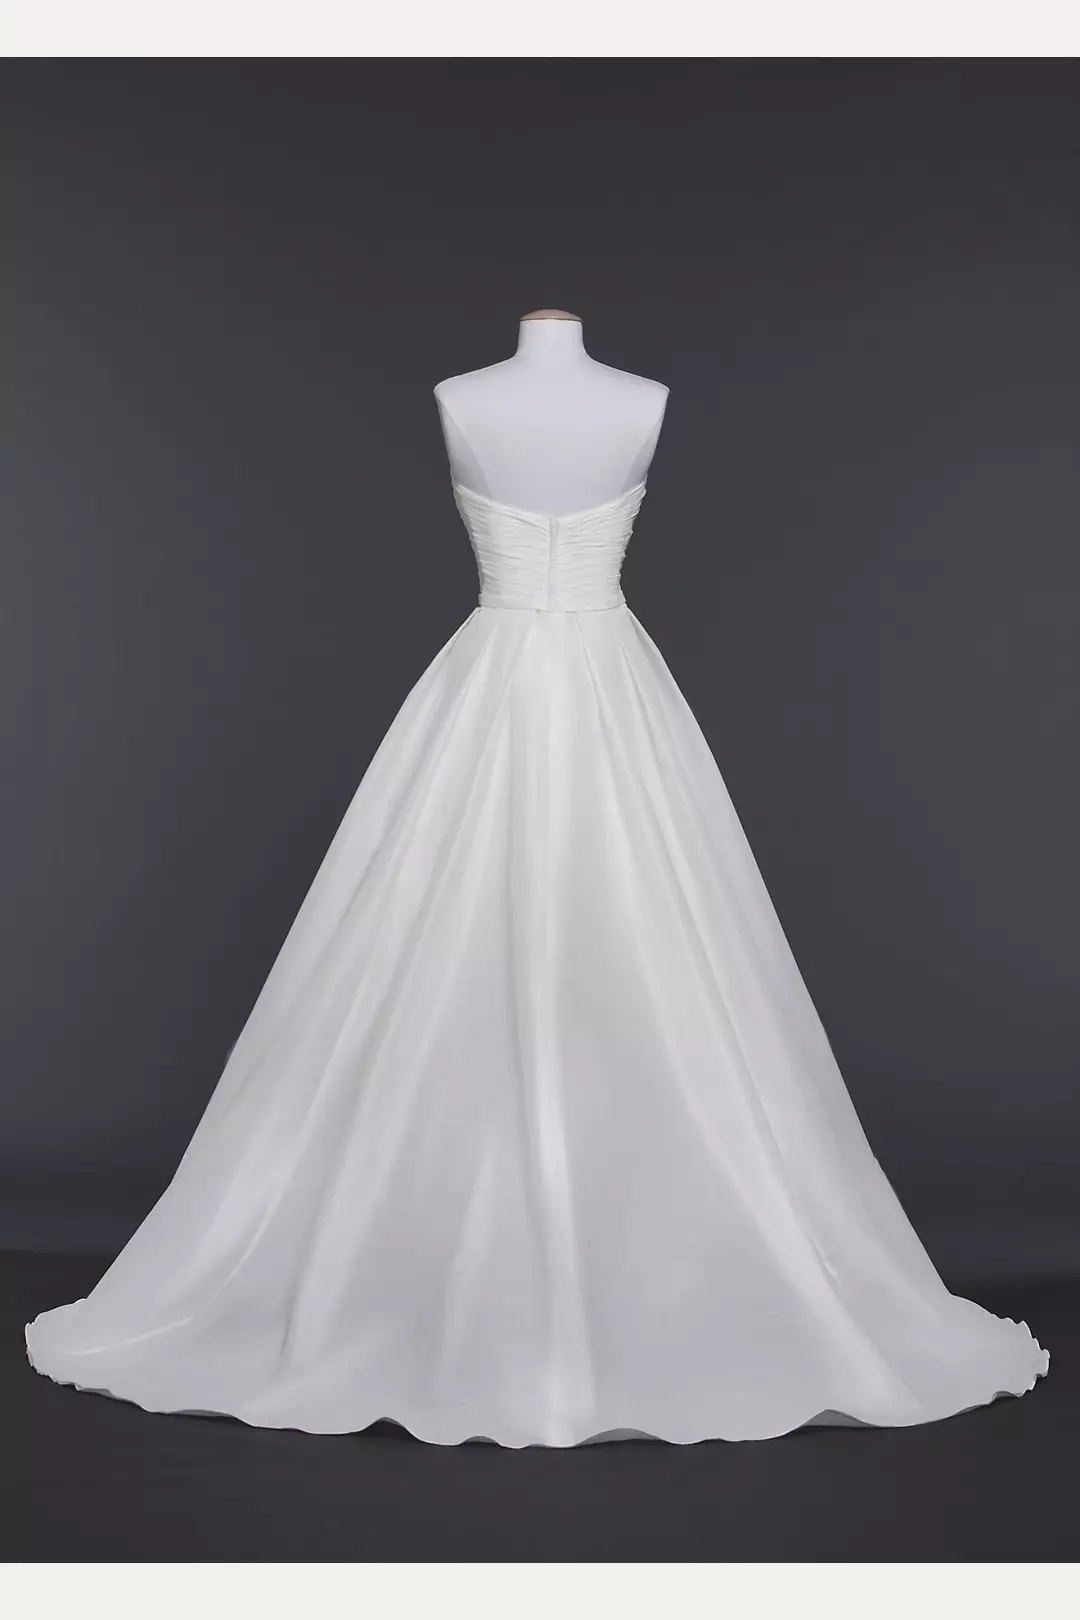 Shantung Taffeta Ball Gown with Ruched Bodice  Image 2